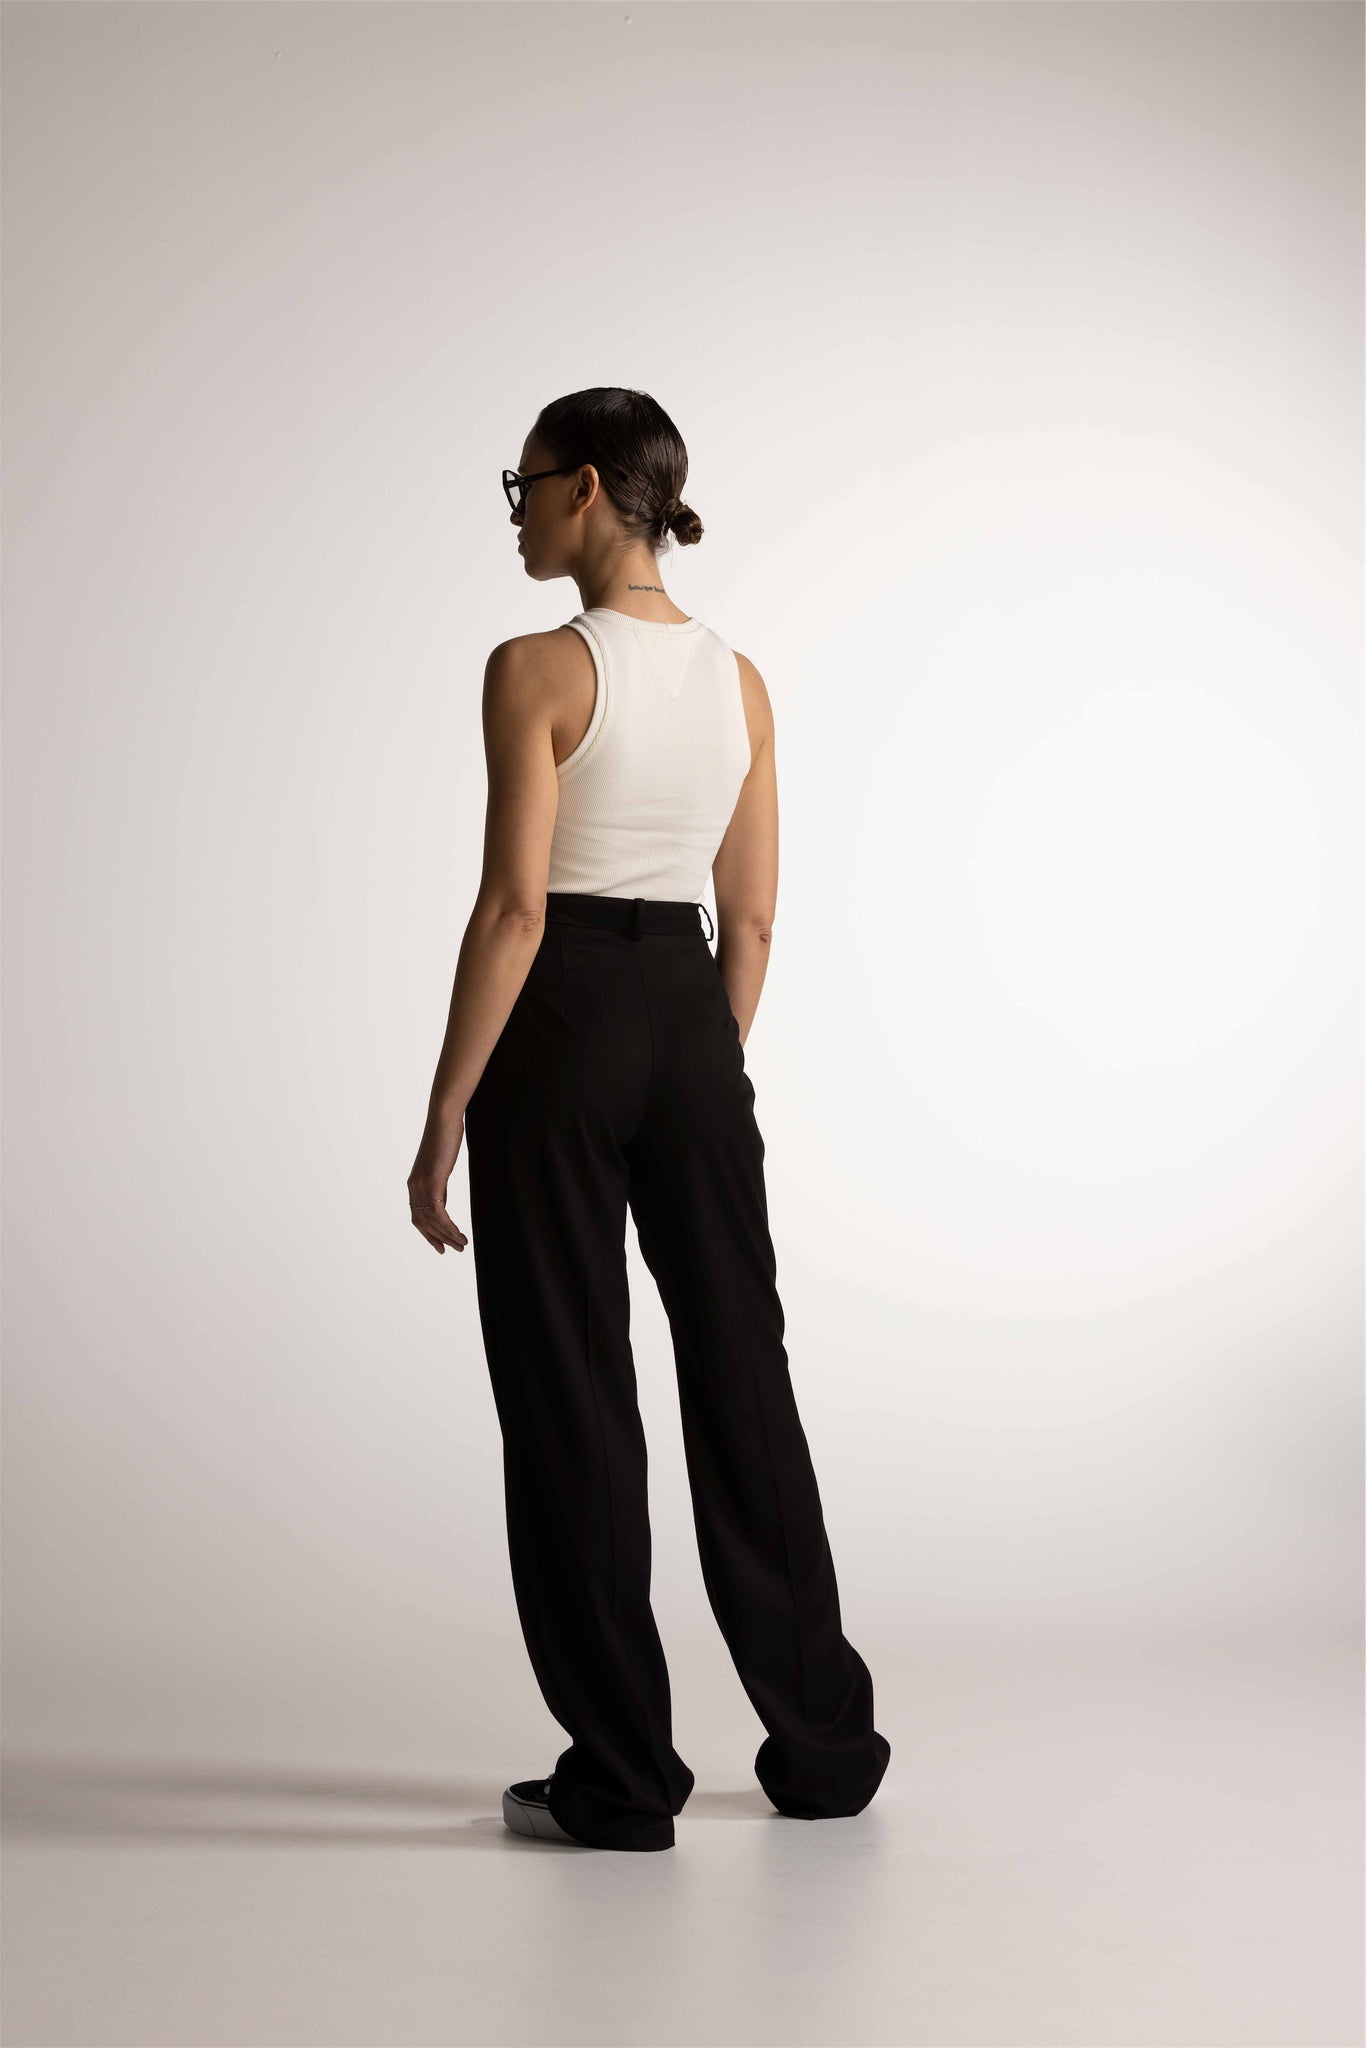 PIXIE WON'T PLAY GENTLELADY TROUSERS BLACK WARM STYLISH WOOL SILK FABRIC CLASSIC DESIGN VERSATILE PROFESSIONAL ATTIRE SPRING SUMMER FALL WINTER FASHION SOPHISTICATED BUSINESS CASUAL FASHION - FORWARDS TIMELESS WARDROBE STAPLE SUSTAINABLE LUXURY CAPSULE COLLECTION ESSENTIALS ELEGANT STRAIGHT CUT